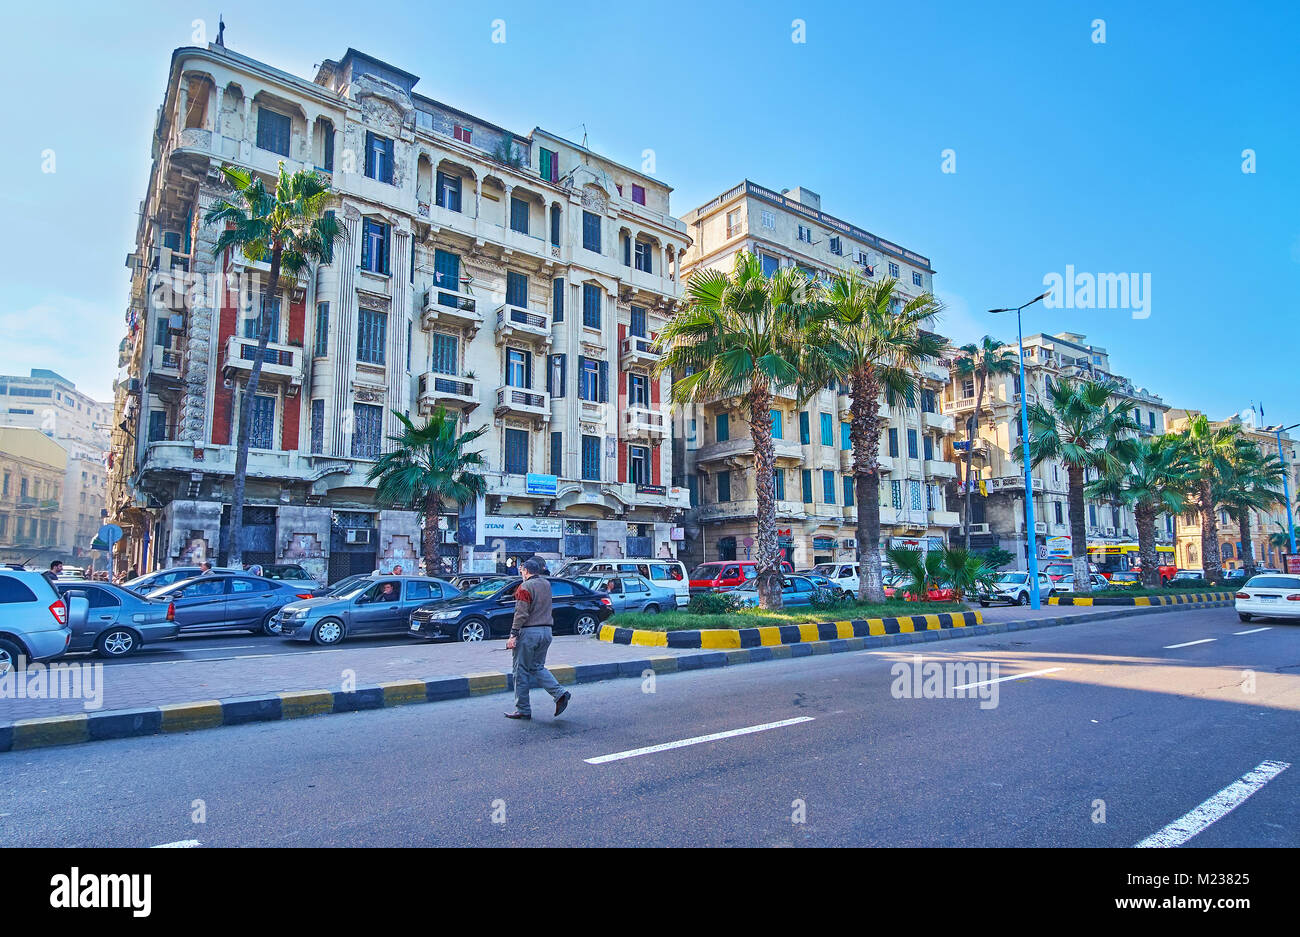 ALEXANDRIA, EGYPT - DECEMBER 17, 2017: The numerous edifices along the Corniche avenue are built in Colonial or European style, on December 17 in Alex Stock Photo